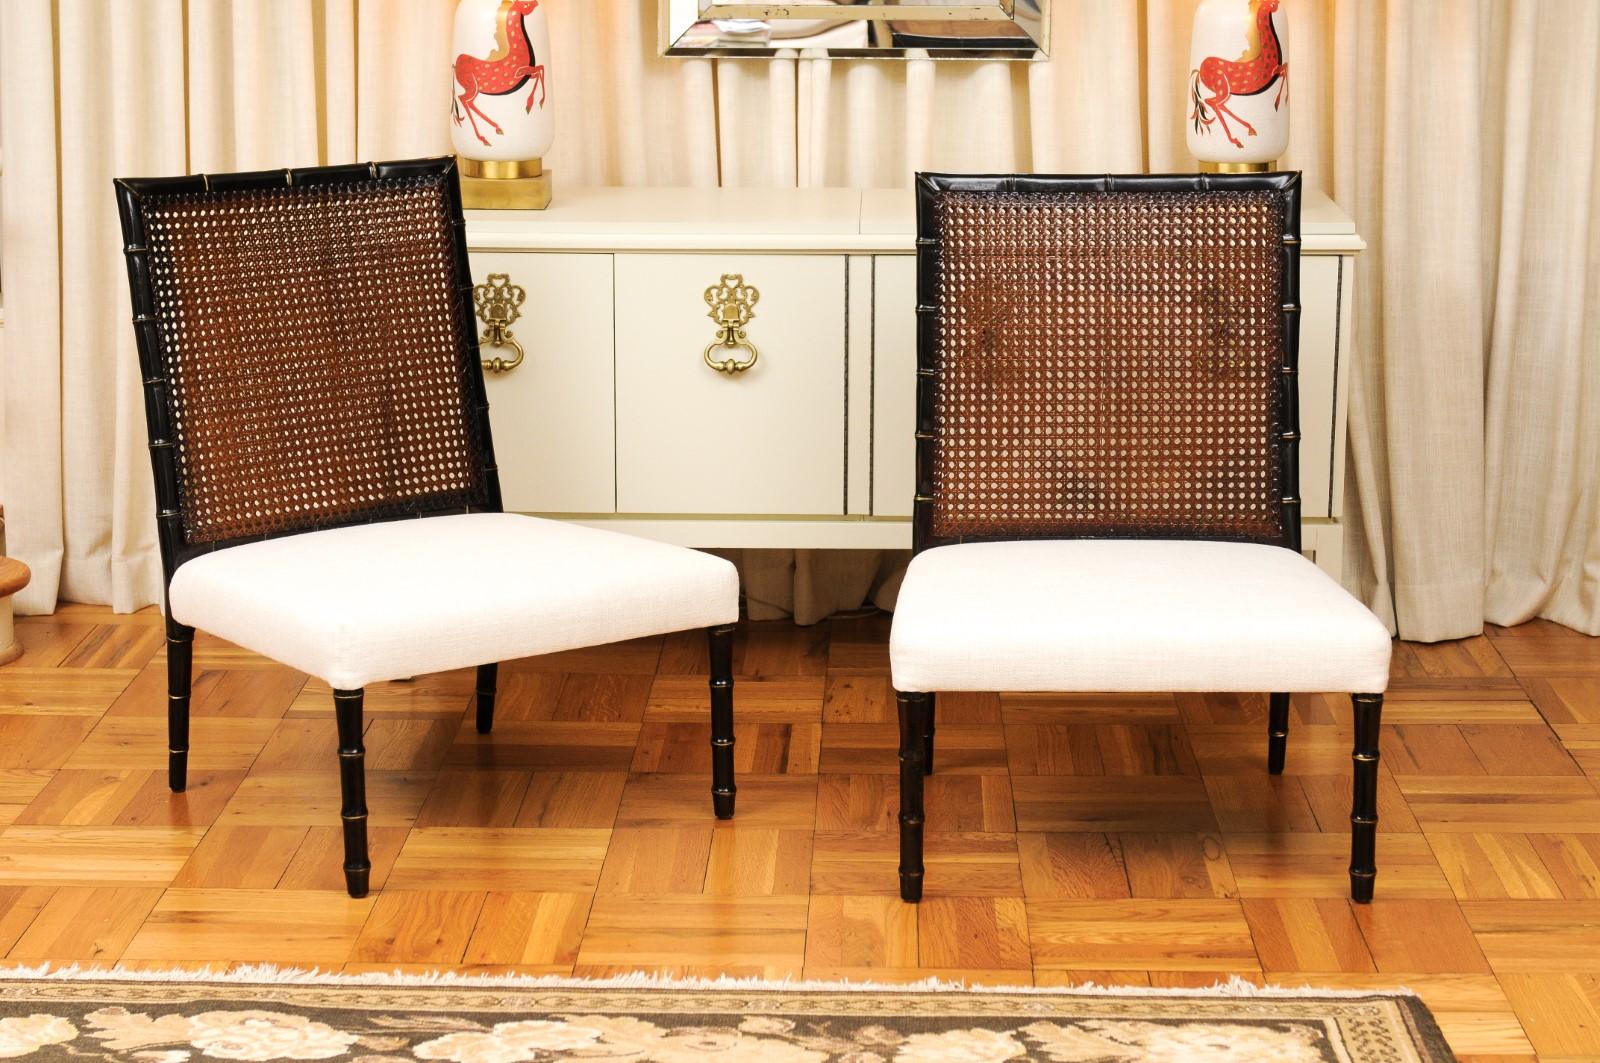 These magnificent club chairs are shipped as professionally photographed and described in the listing narrative: Meticulously professionally restored, upholstered and ready to enjoy. Expert custom upholstery service is available.

A stunning pair